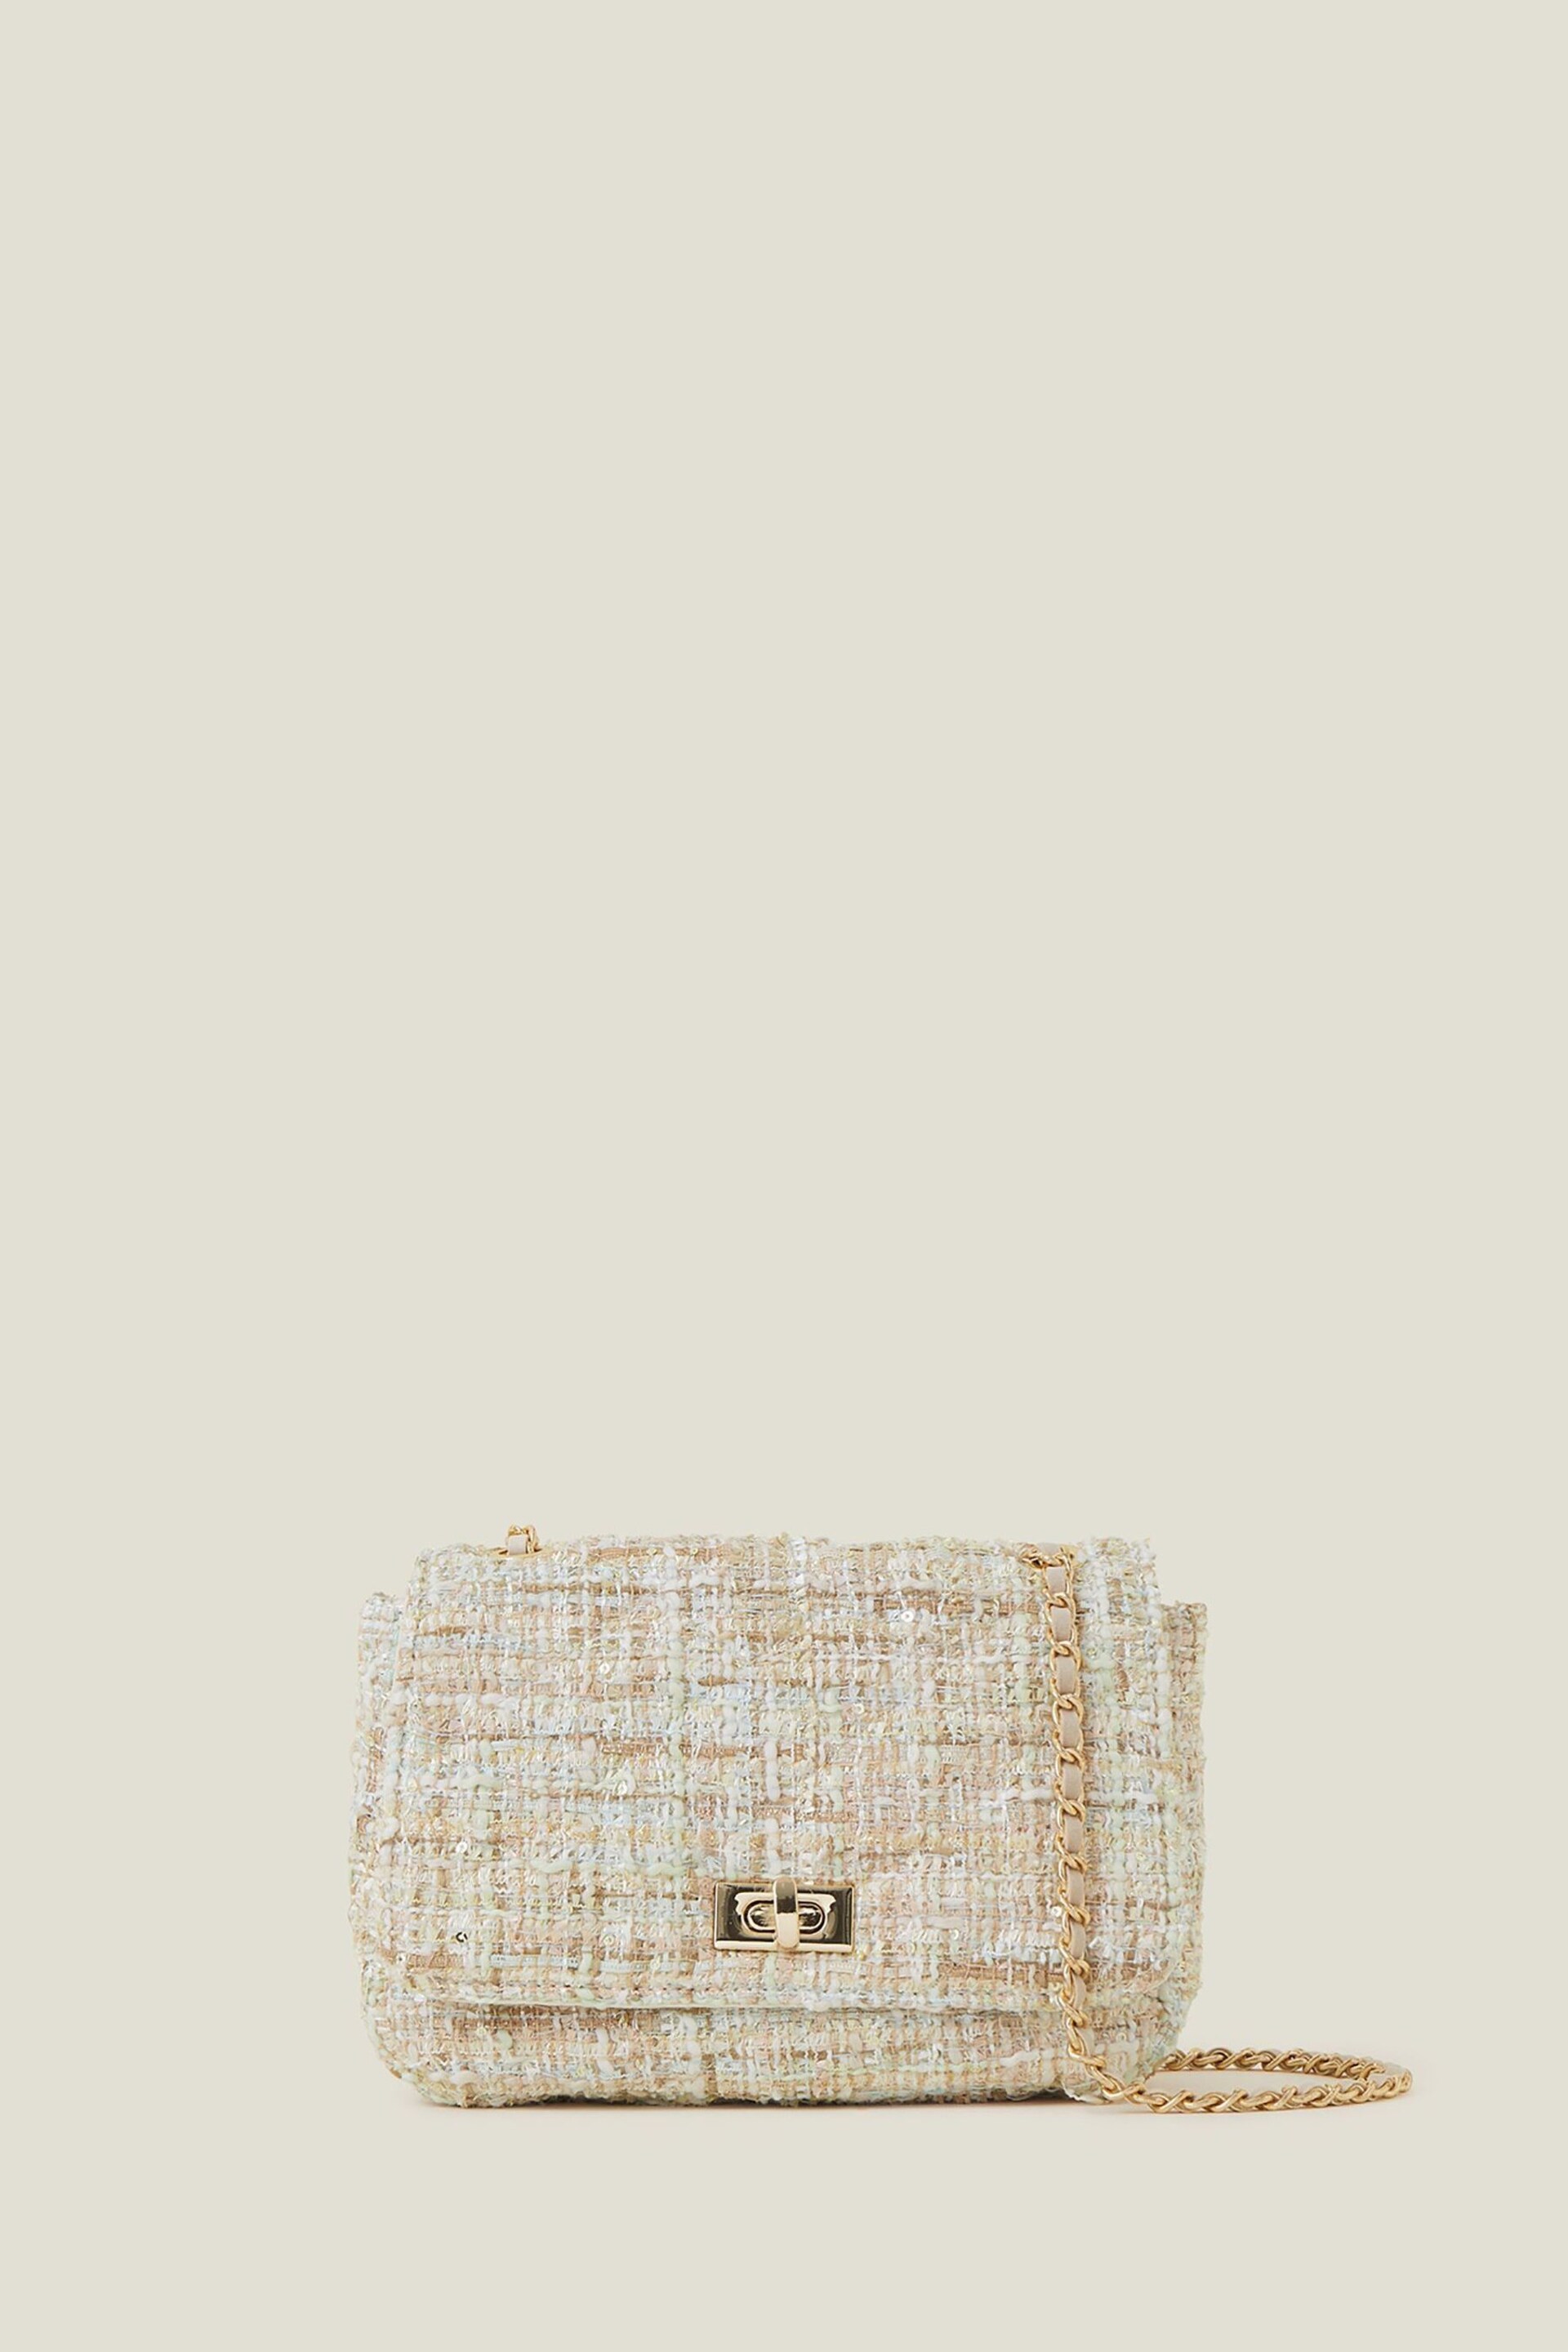 Accessorize White Boucle Cross-Body Bag - Image 2 of 4